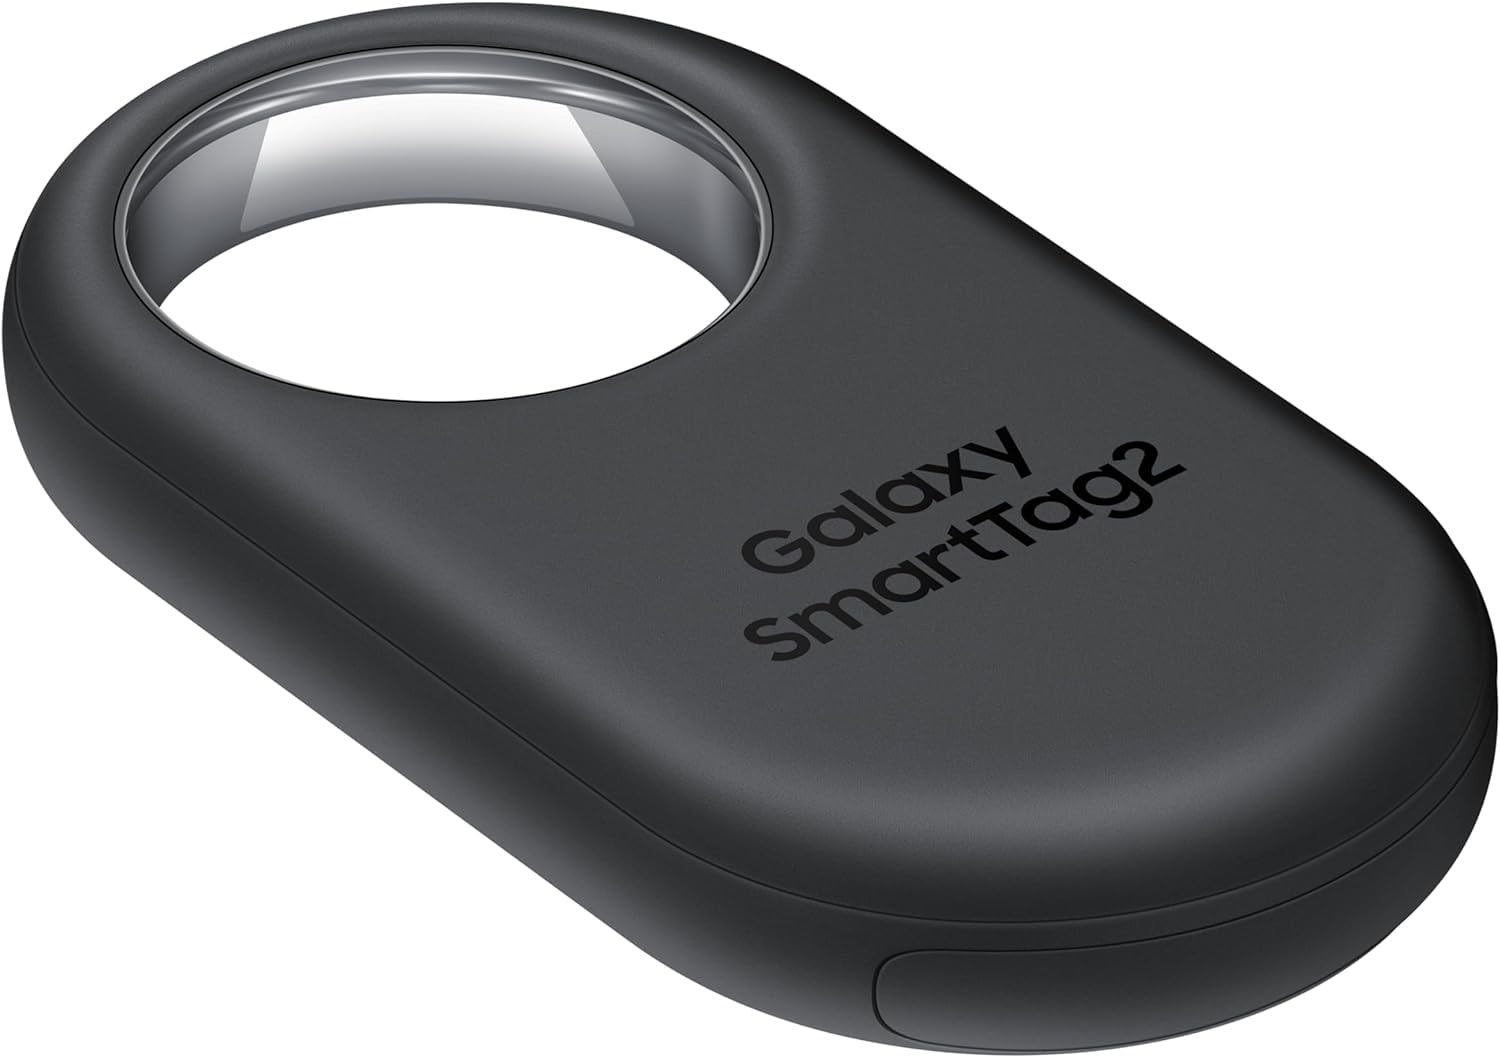 Samsung SmartTag2 (2023) Bluetooth + UWB, IP67 Water and Dust